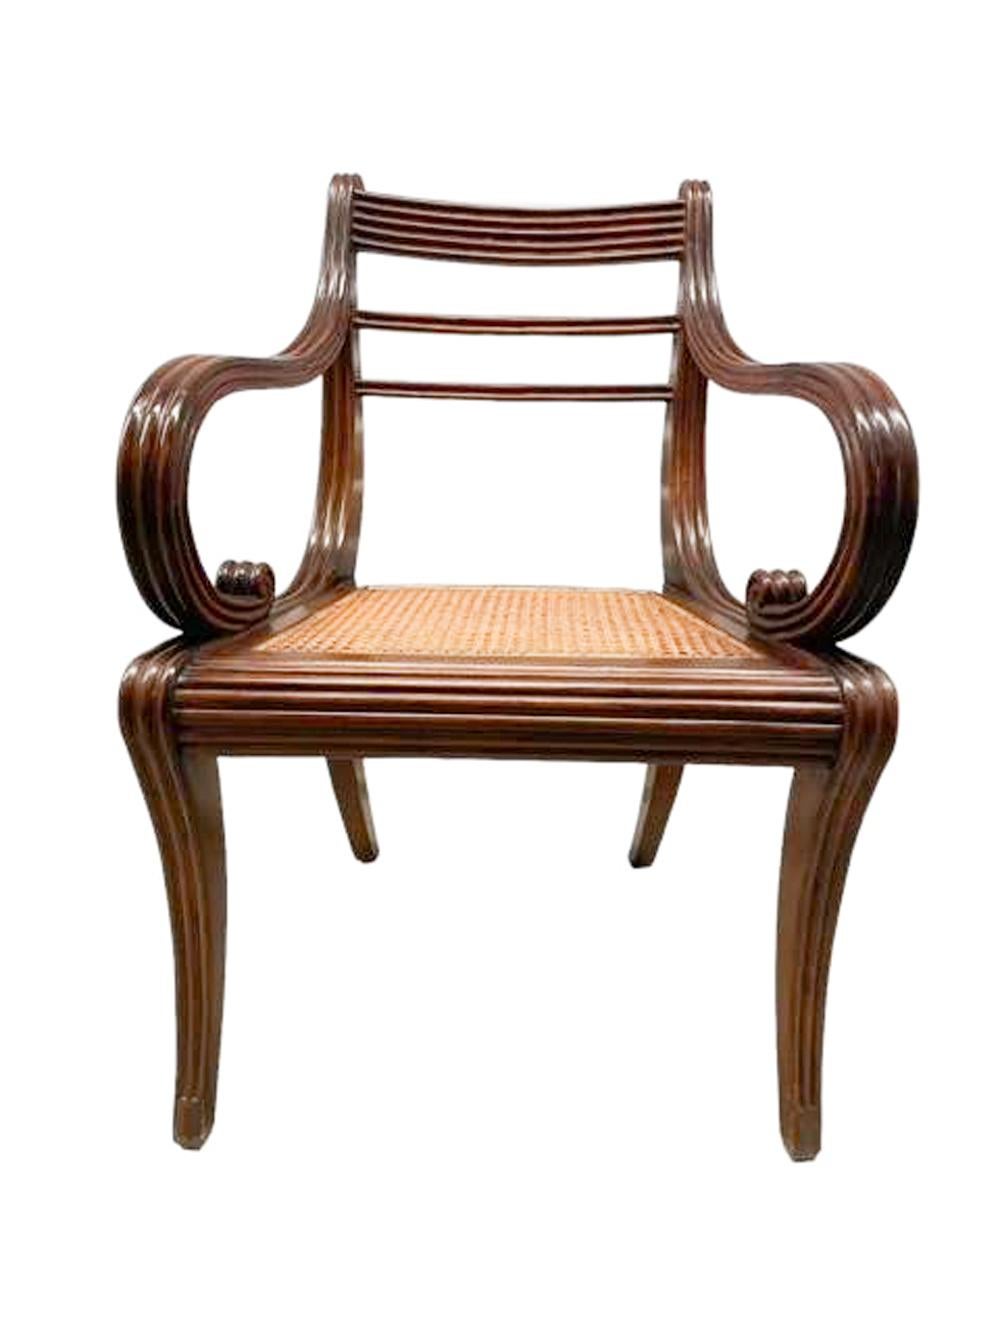 Pair of Anglo-Indian Mahogany Armchairs with Reeded Detail and Caned Seats  For Sale 2